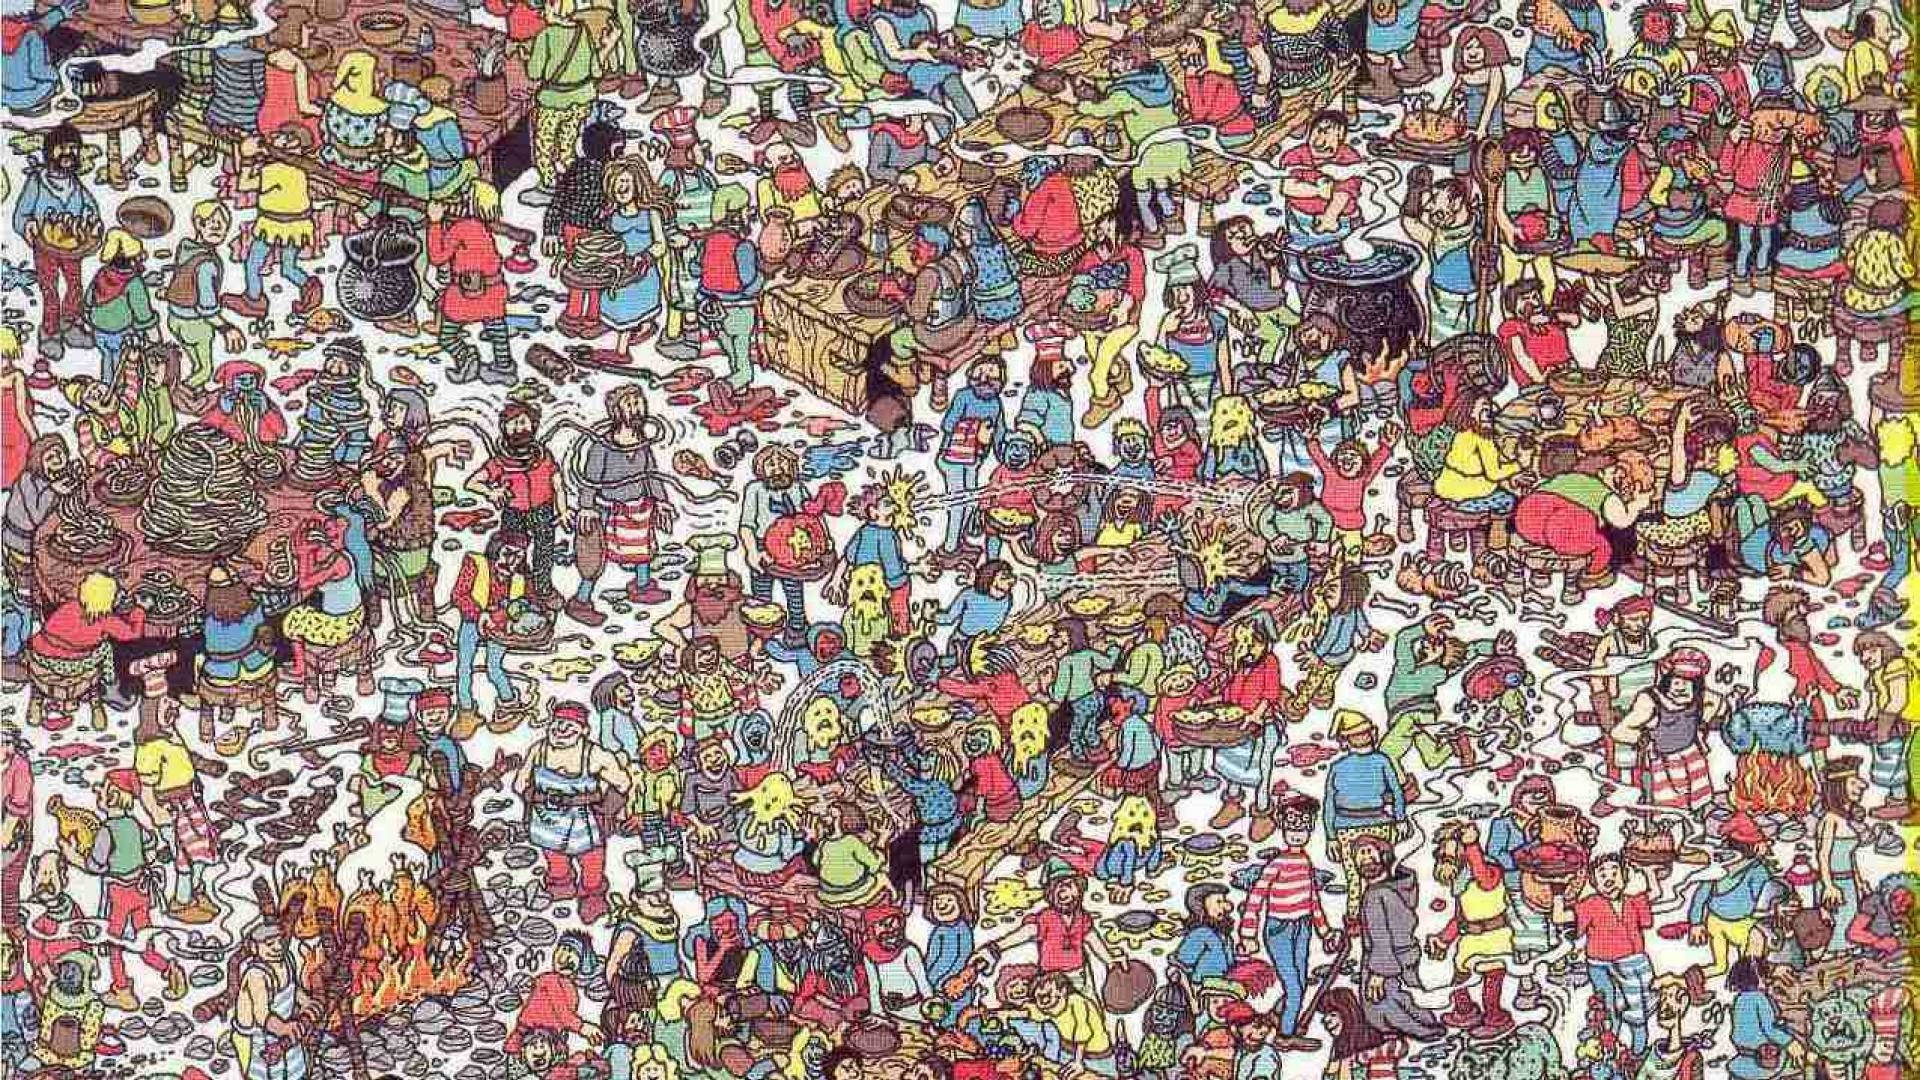 Spotting Waldo in the Midst of a Grand Feast Wallpaper